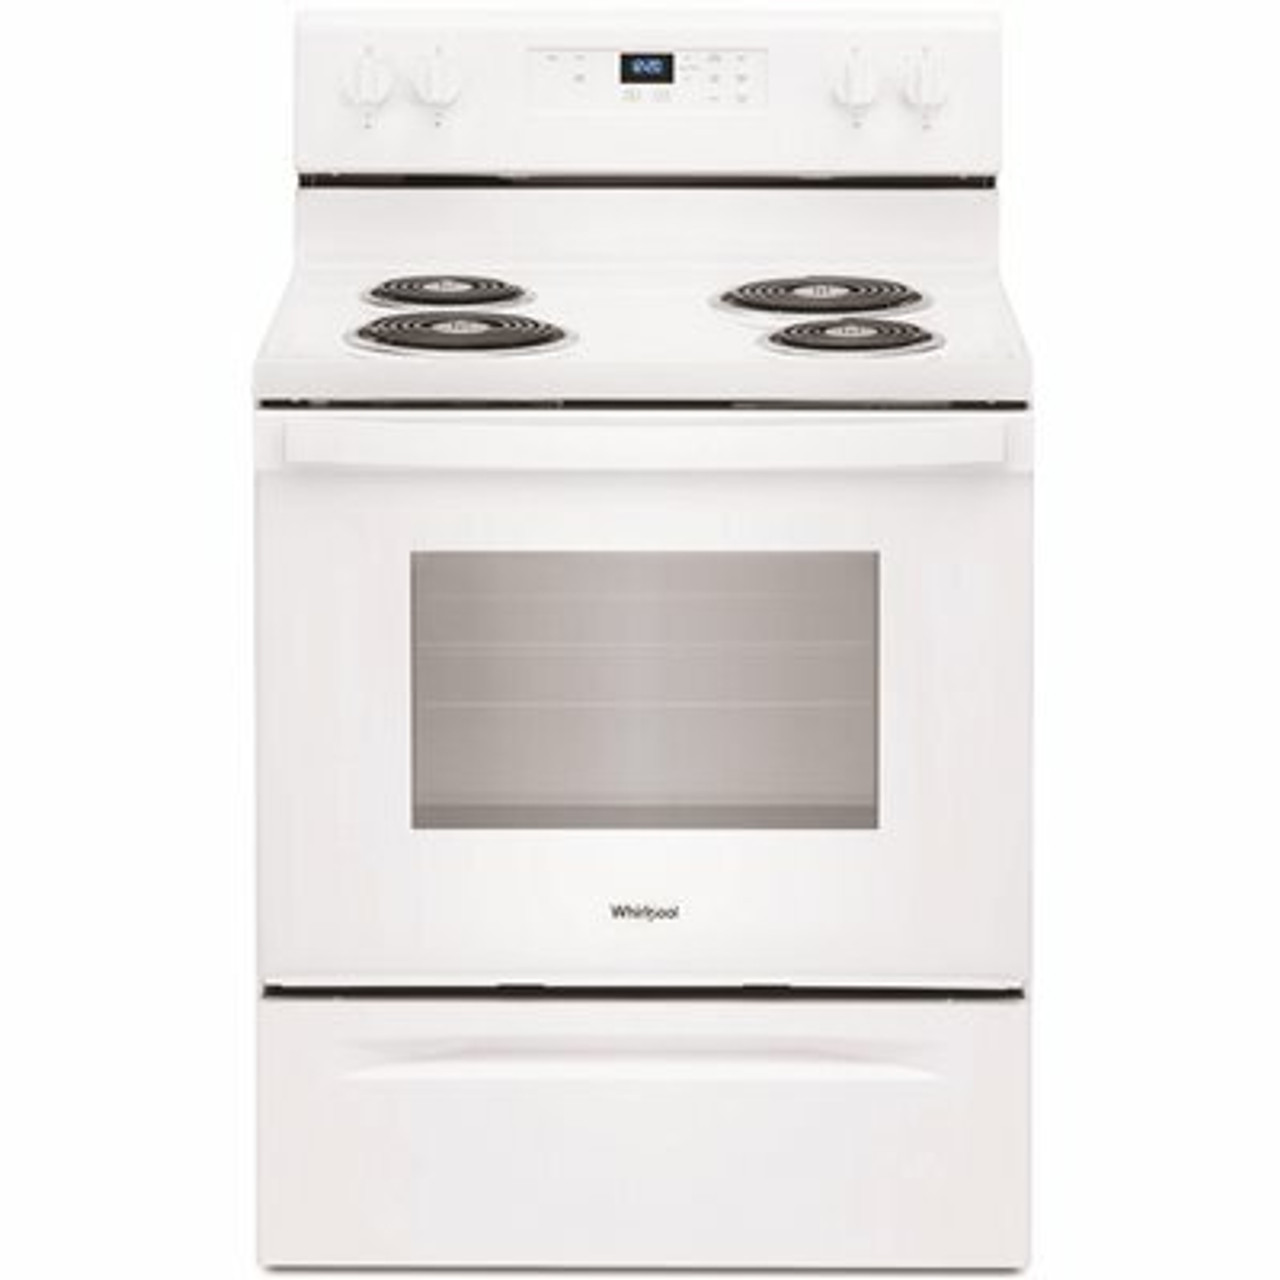 Whirlpool 30 In. 4.8 Cu. Ft. 4-Burner Electric Range With Keep Warm Setting In White With Storage Drawer